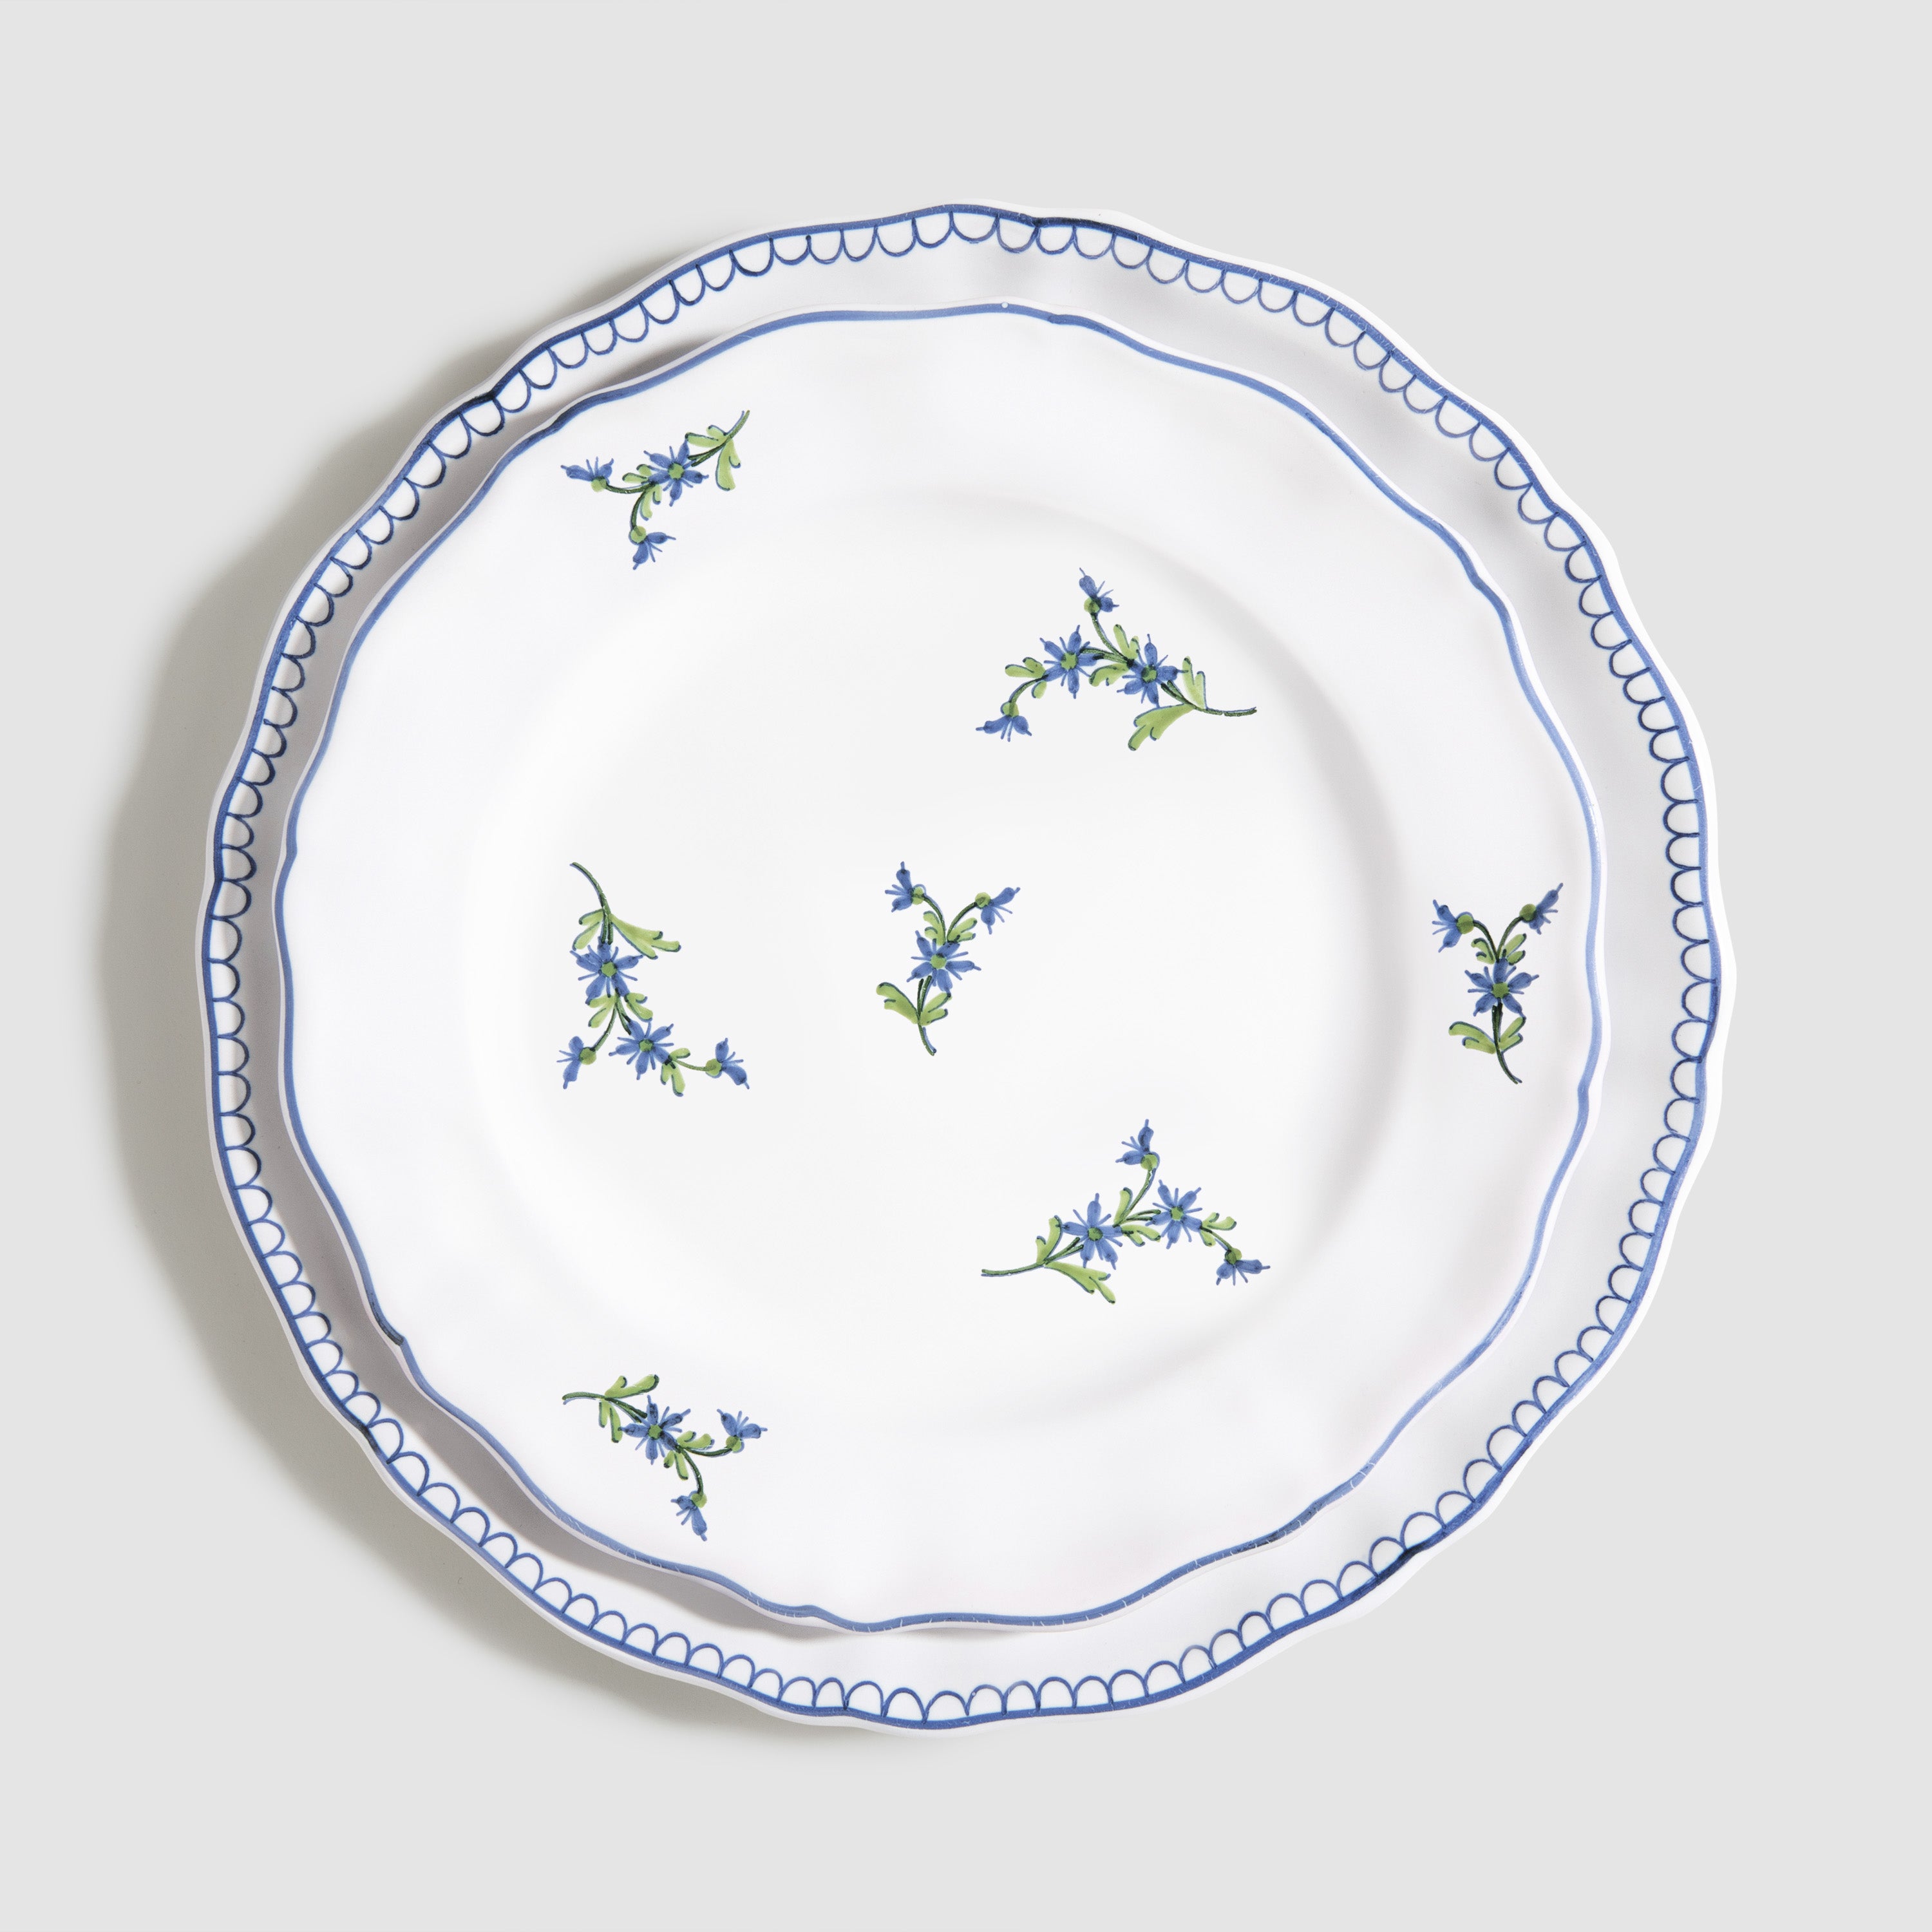 Les Bleuets Salad Plate, Blue and Green with Bouclette Dinner Plate